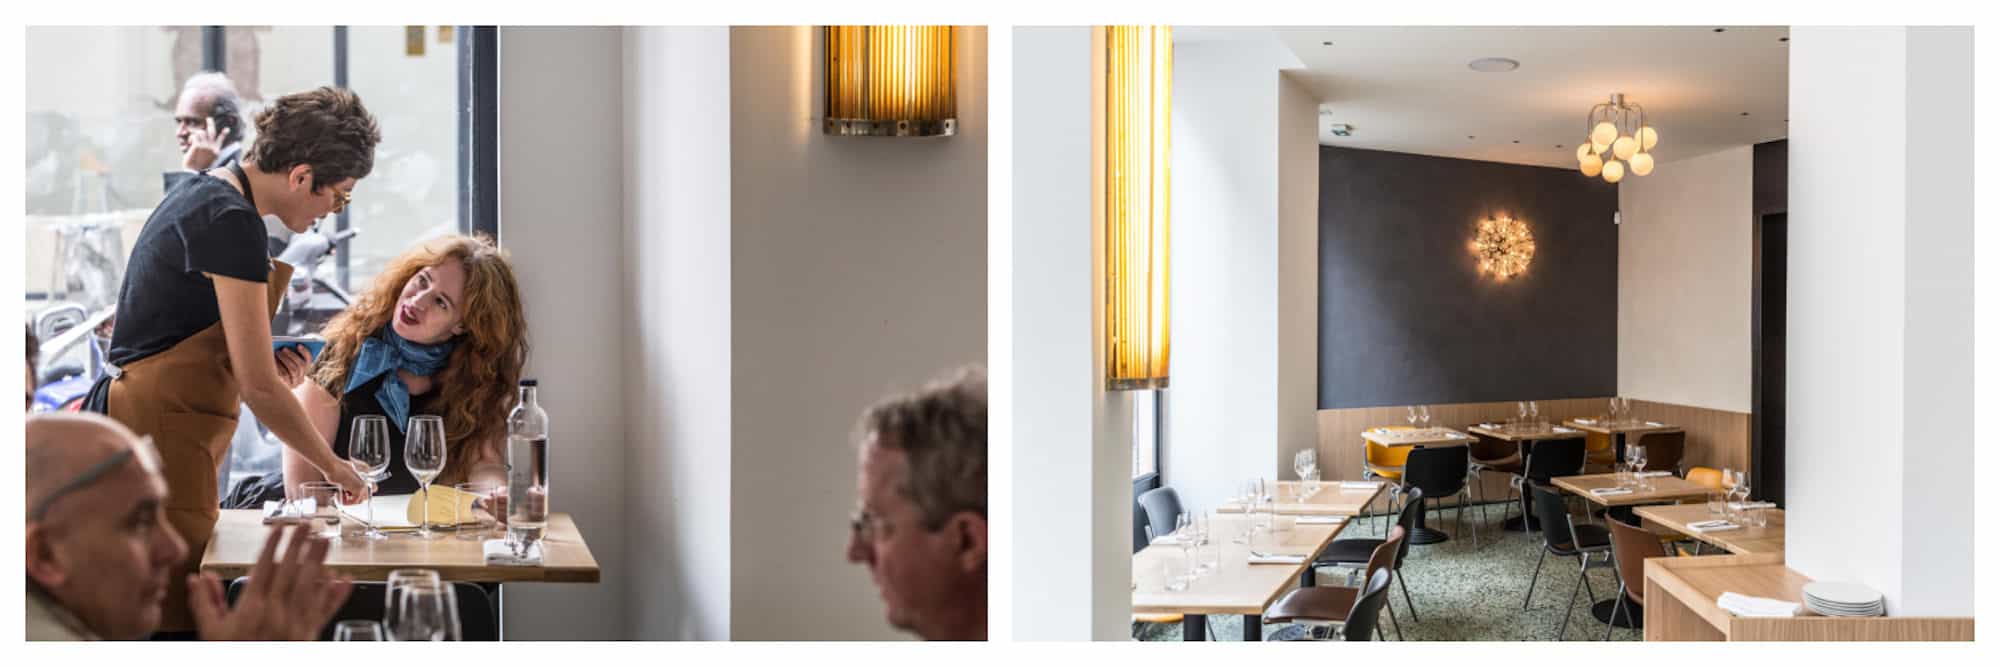 HiP Paris Blog reviews the Italian restaurant Passerini where the Italian staff is friendly (left) and the interiors of natural materials like wood and terrazzo floors are simple and soothing (right).